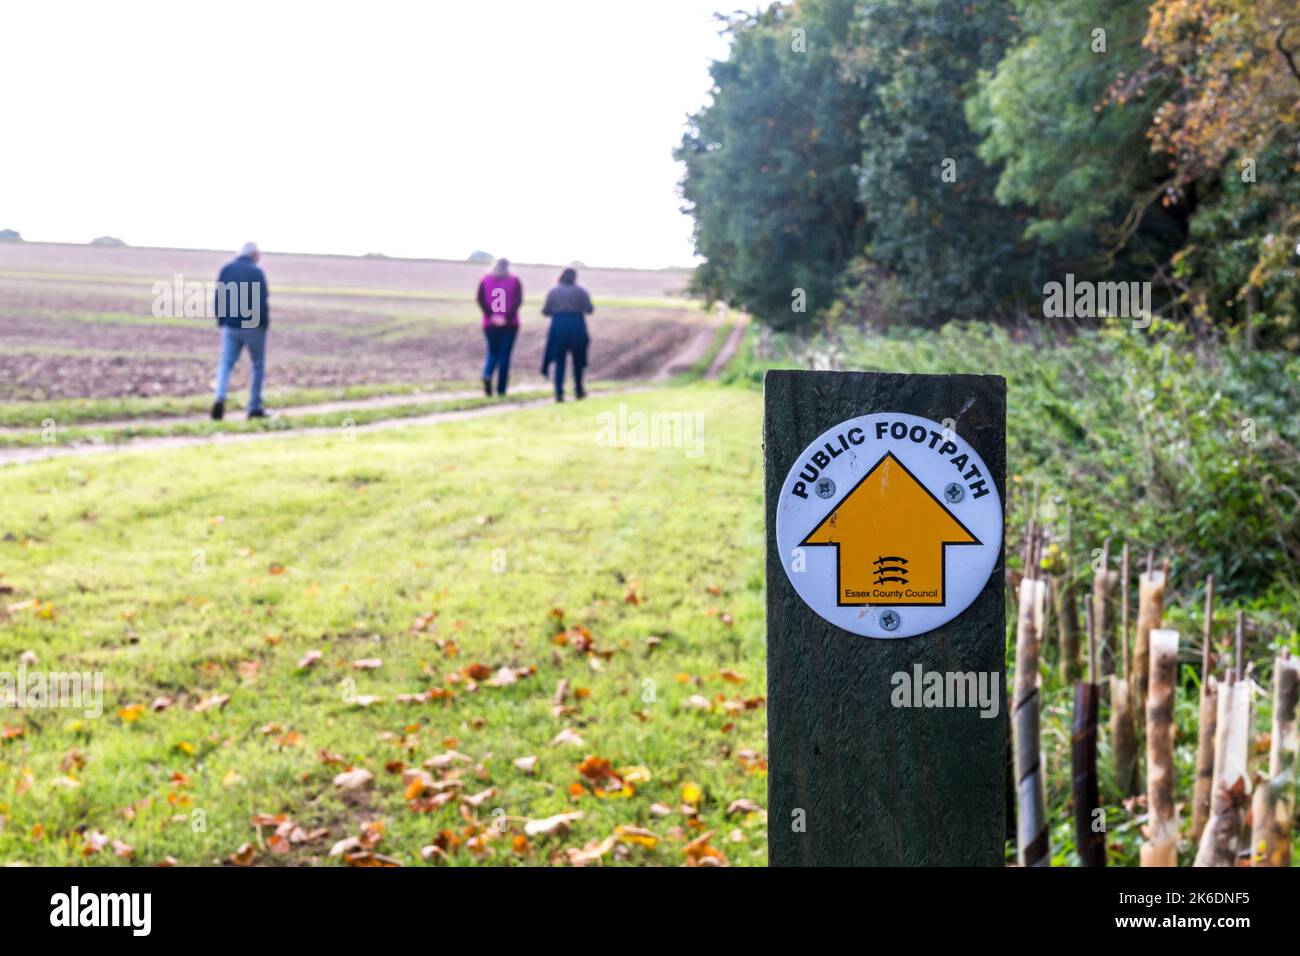 People on a country walk in Essex during autumn along a Public Footpath with an Essex County Council waymarking sign. Stock Photo